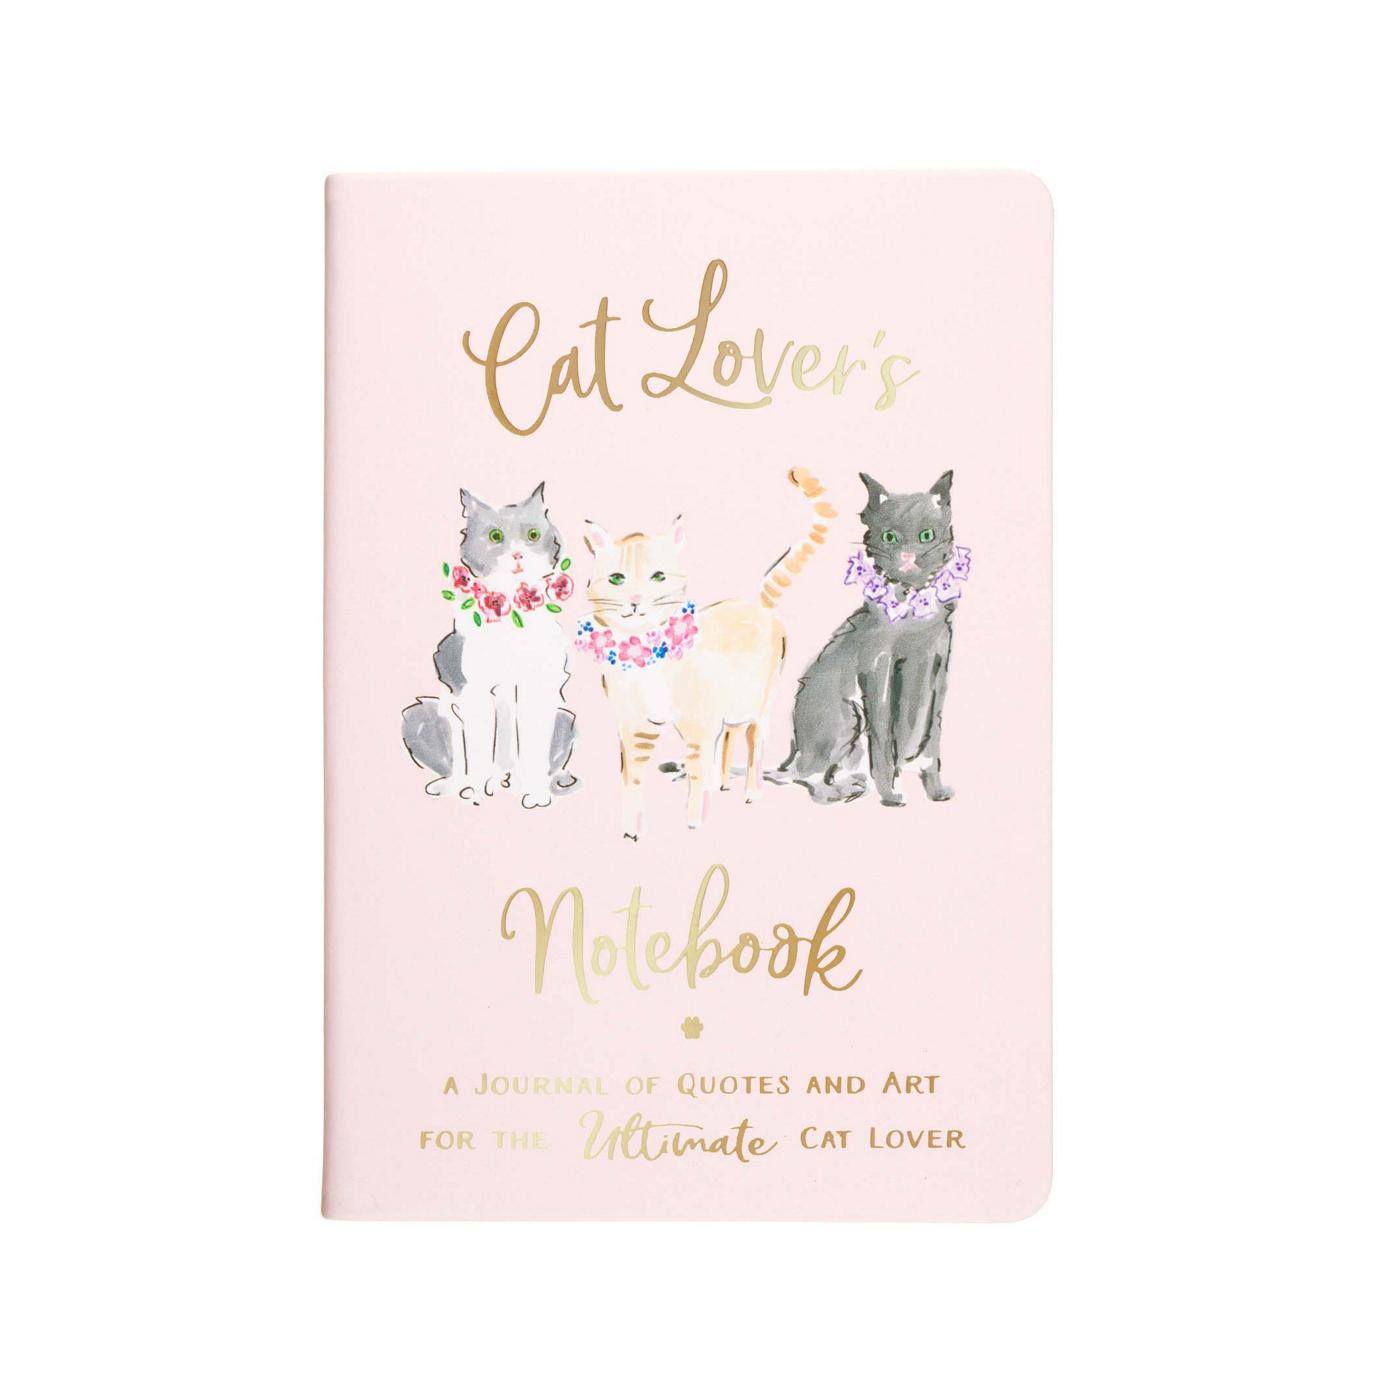 Eccolo Cat Lover's Journal; image 1 of 3